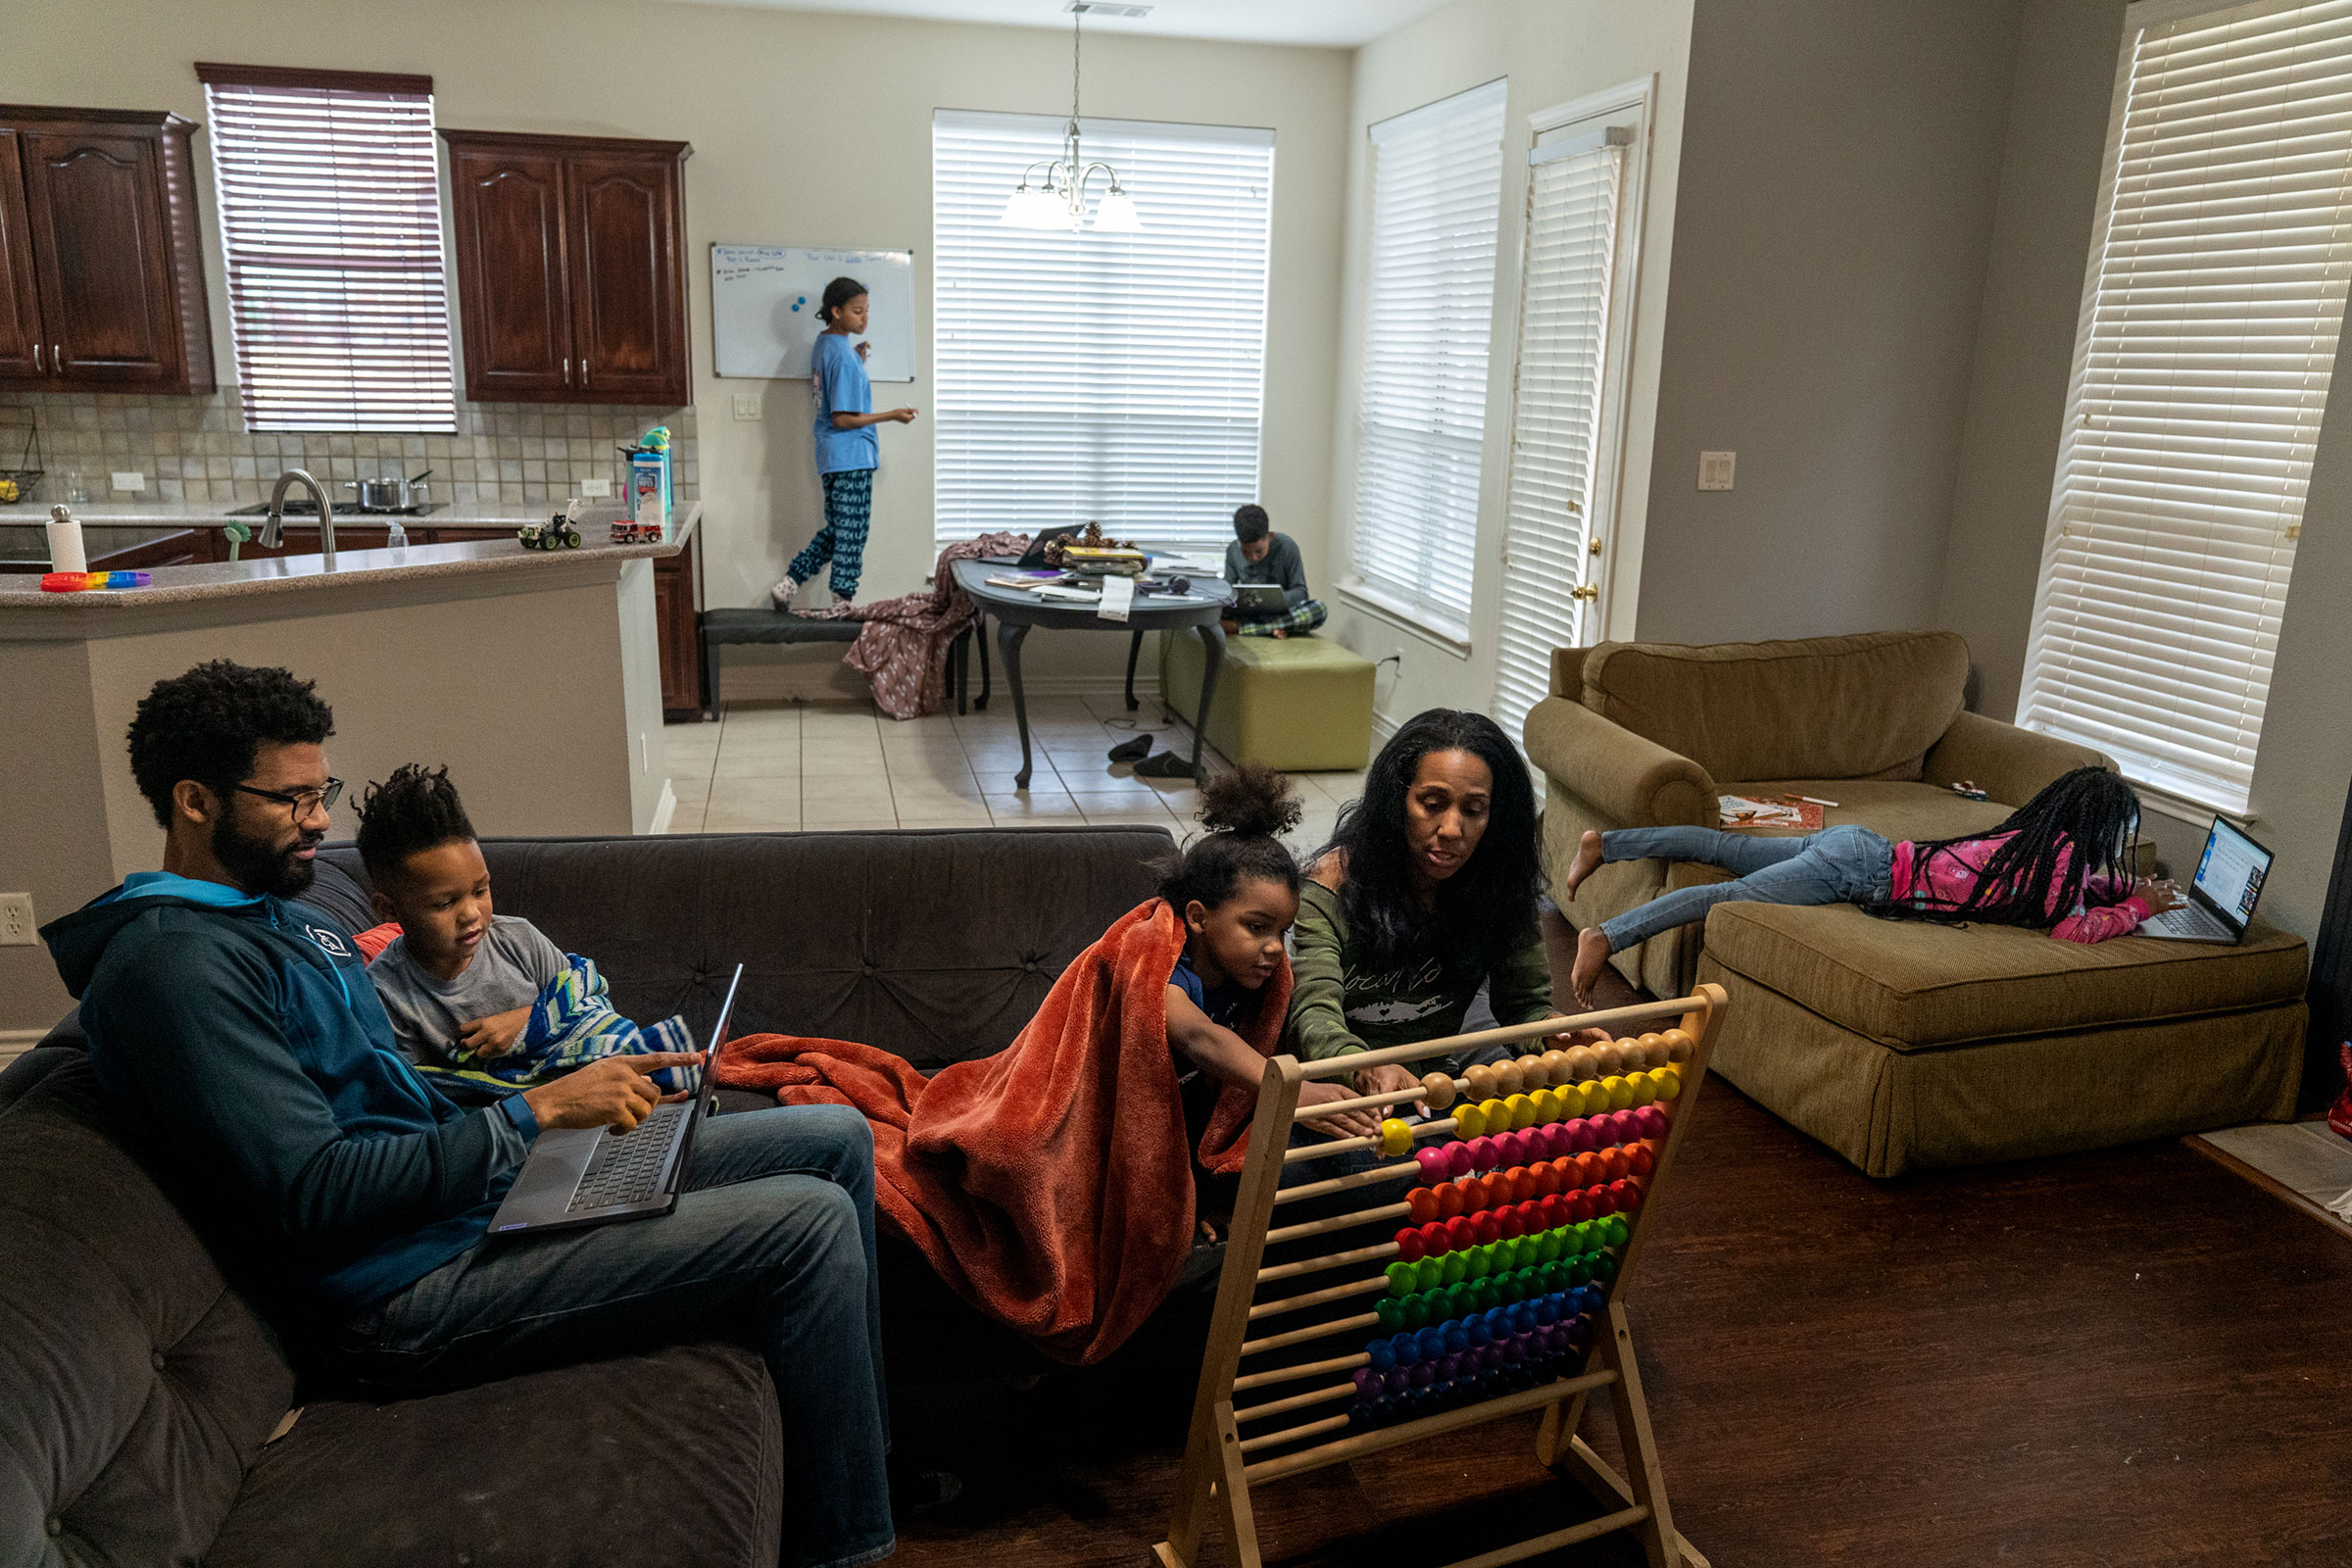 Brian and Andrea Thomas help their two youngest children with their homeschooling lesson at their home in Richardson, Tx. on Feb. 23, 2022. (Ilana Panich-Linsman for TIME)